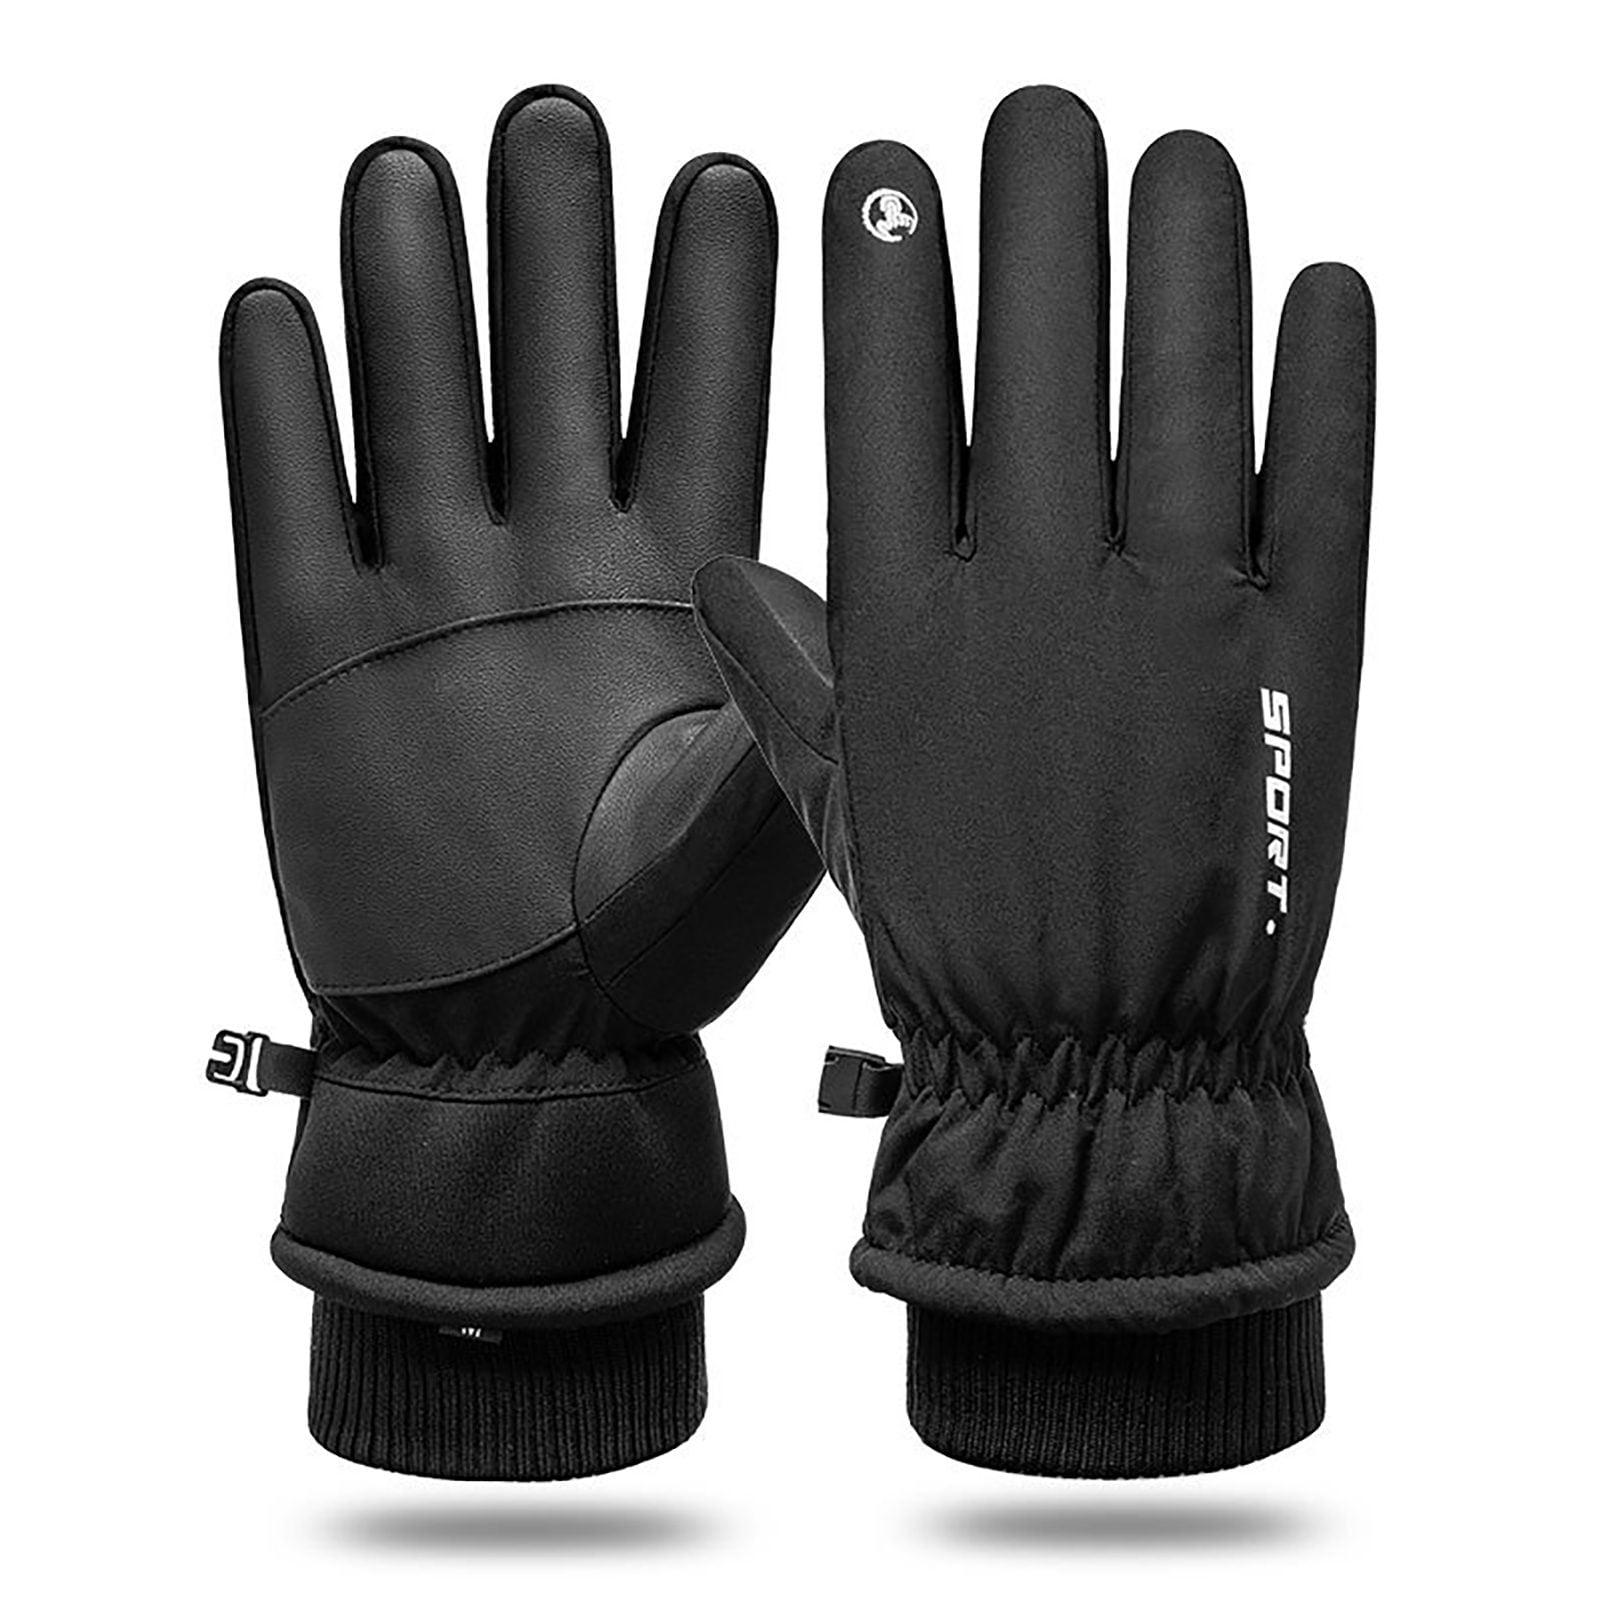 Winter Ski Gloves Touch Screen Sport Glove Waterproof For Skiing Skating Cycling 